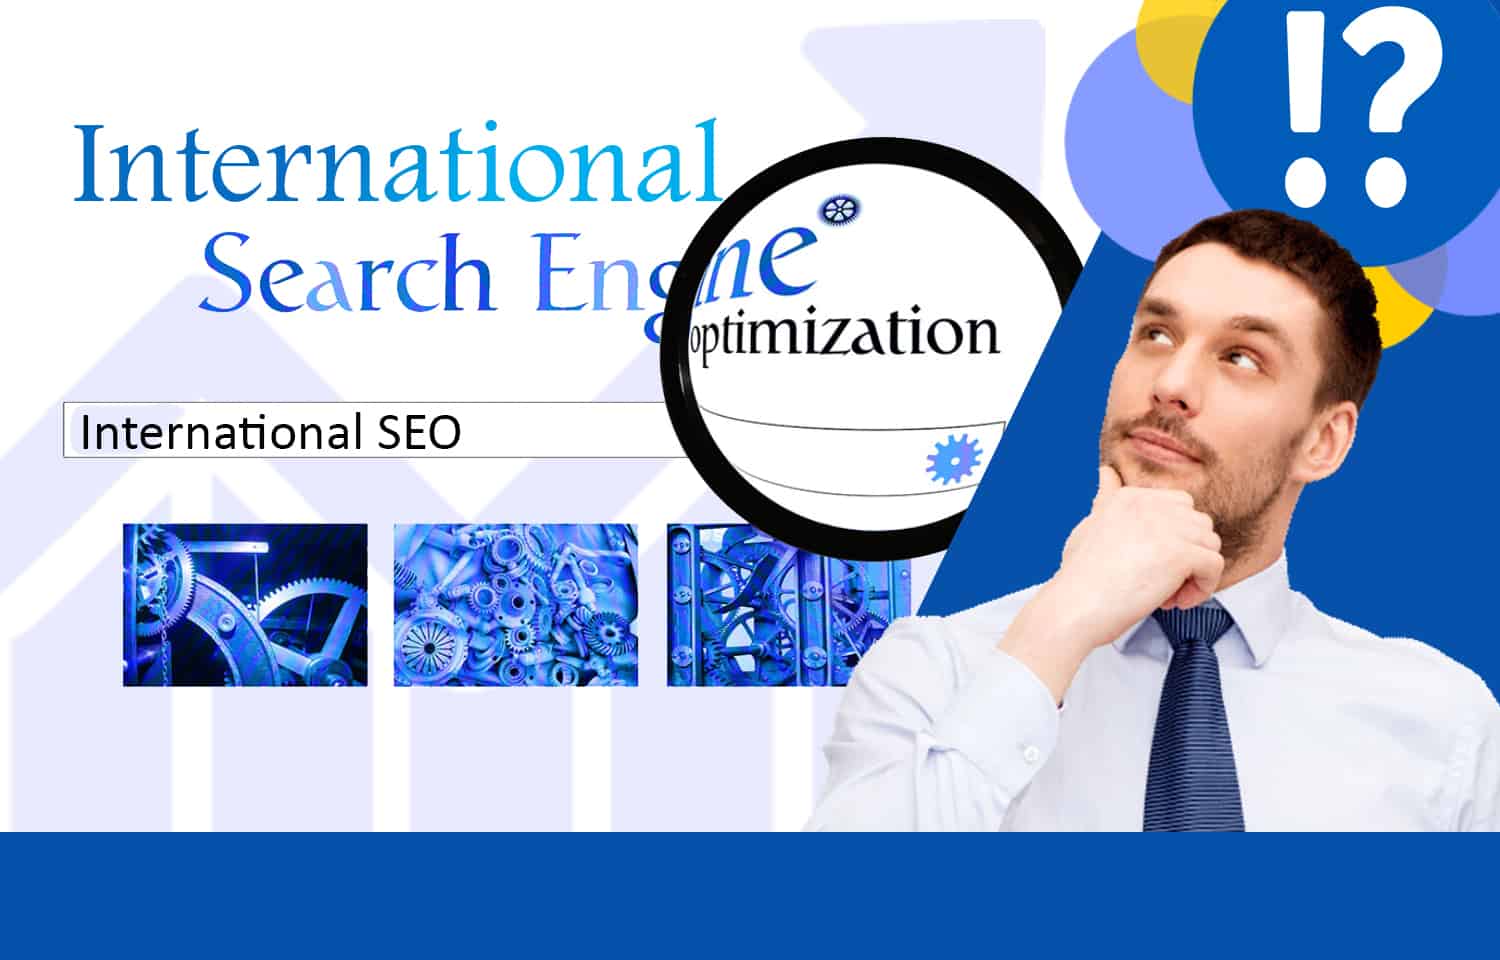 7 International SEO Questions to Ask for a Successful Strategy